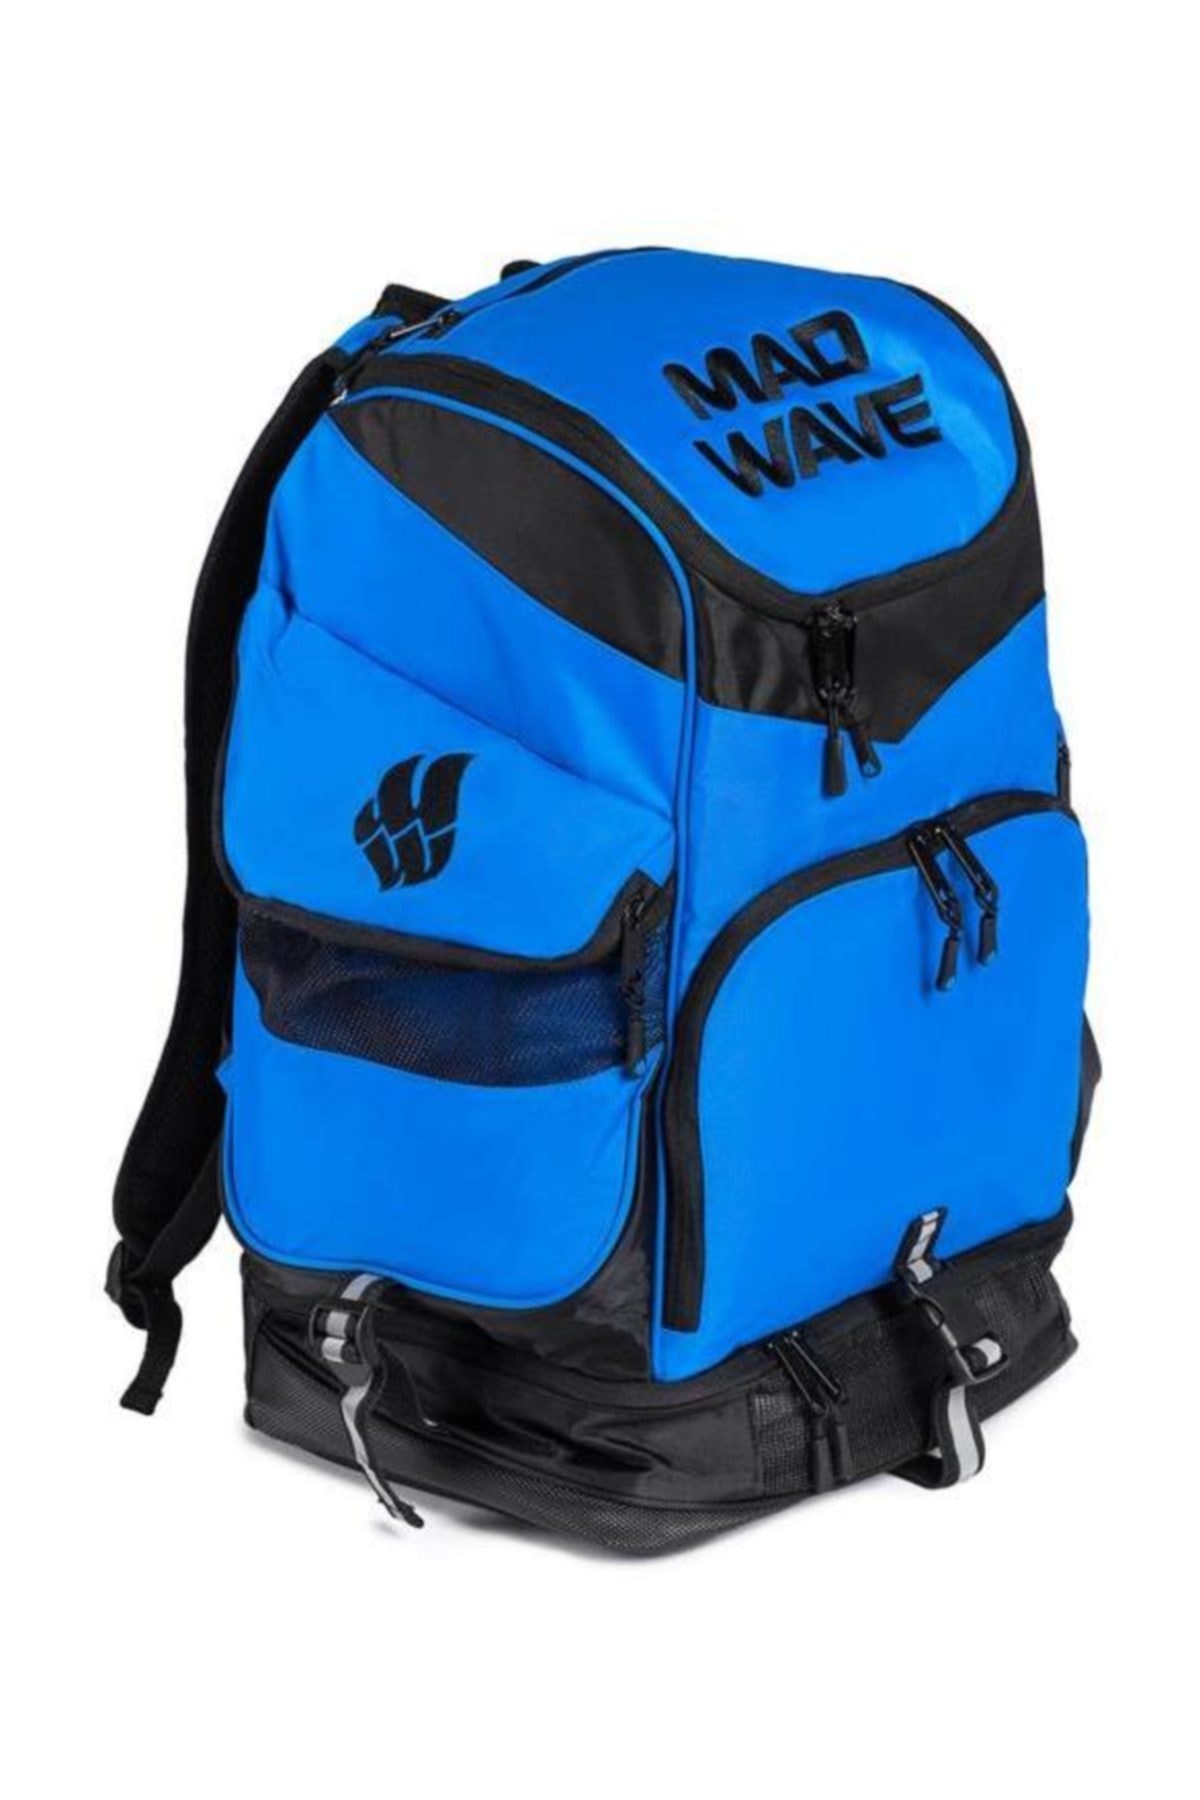 Mad Wave M1123 01 0 04w Backpack Backpack Mad Team, 52?32?2